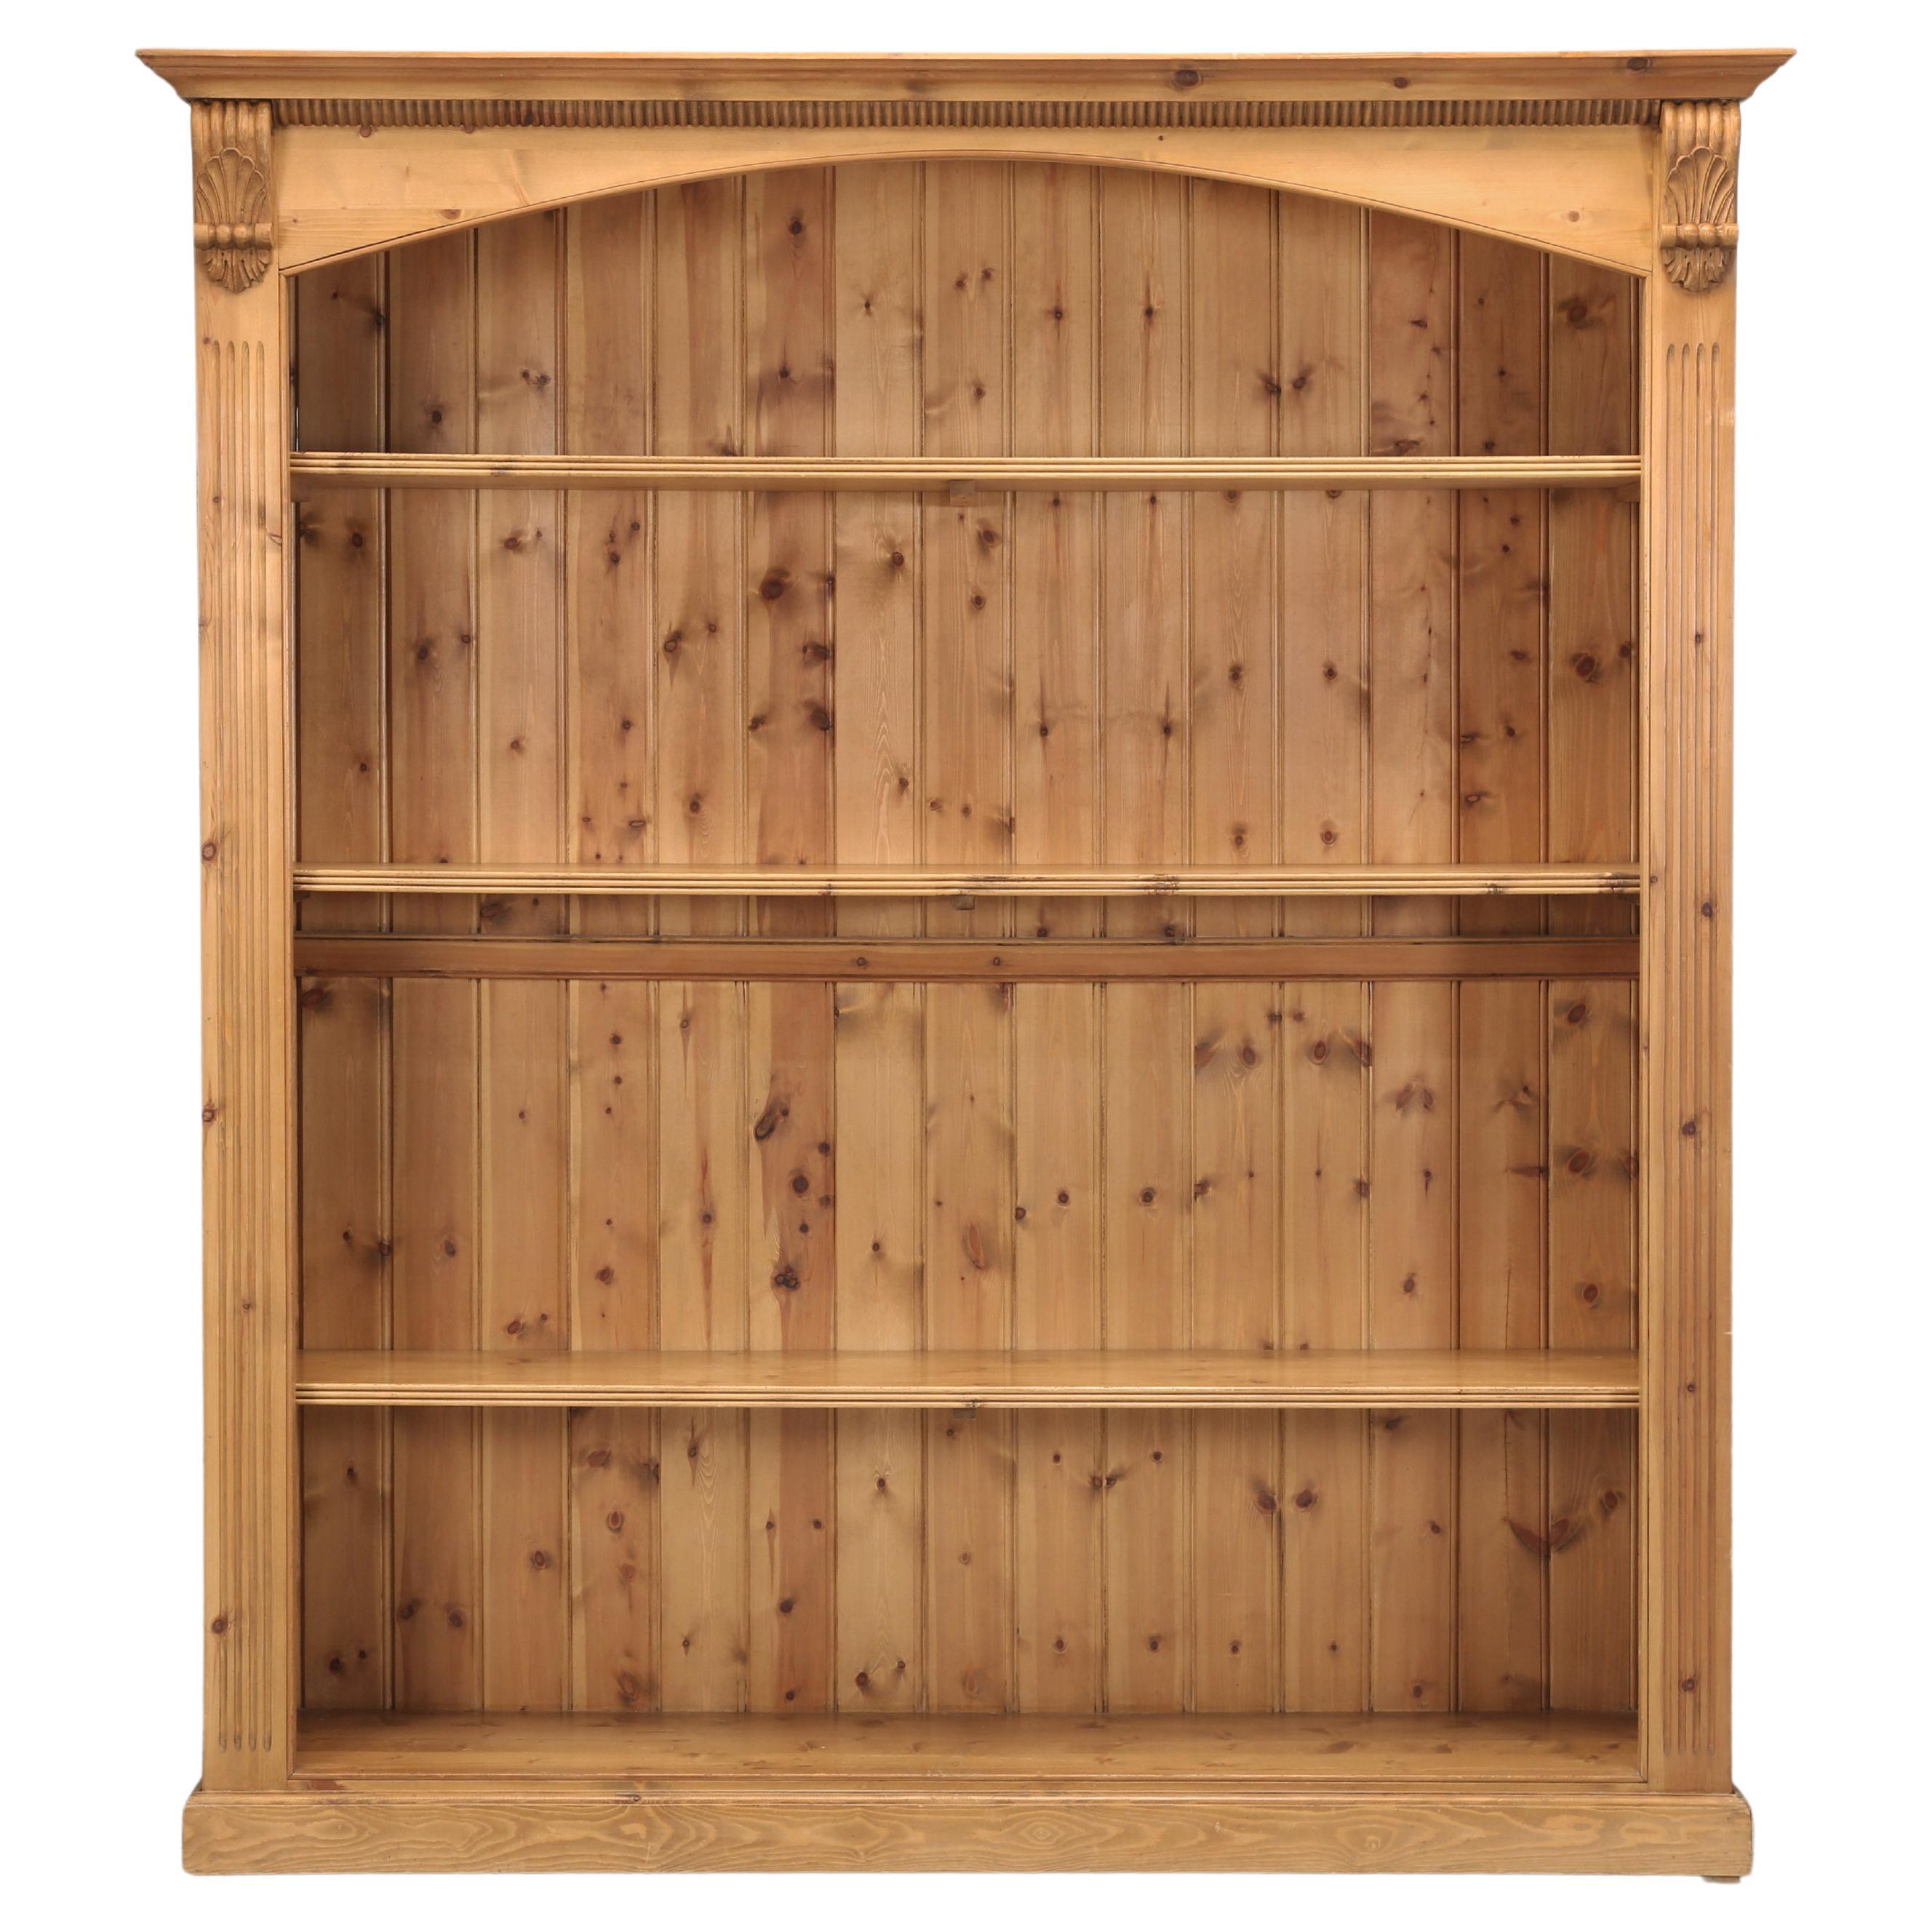 English Pine Country Bookcase Over 6 Feet Wide, Traditional Beeswax by Chrispyn